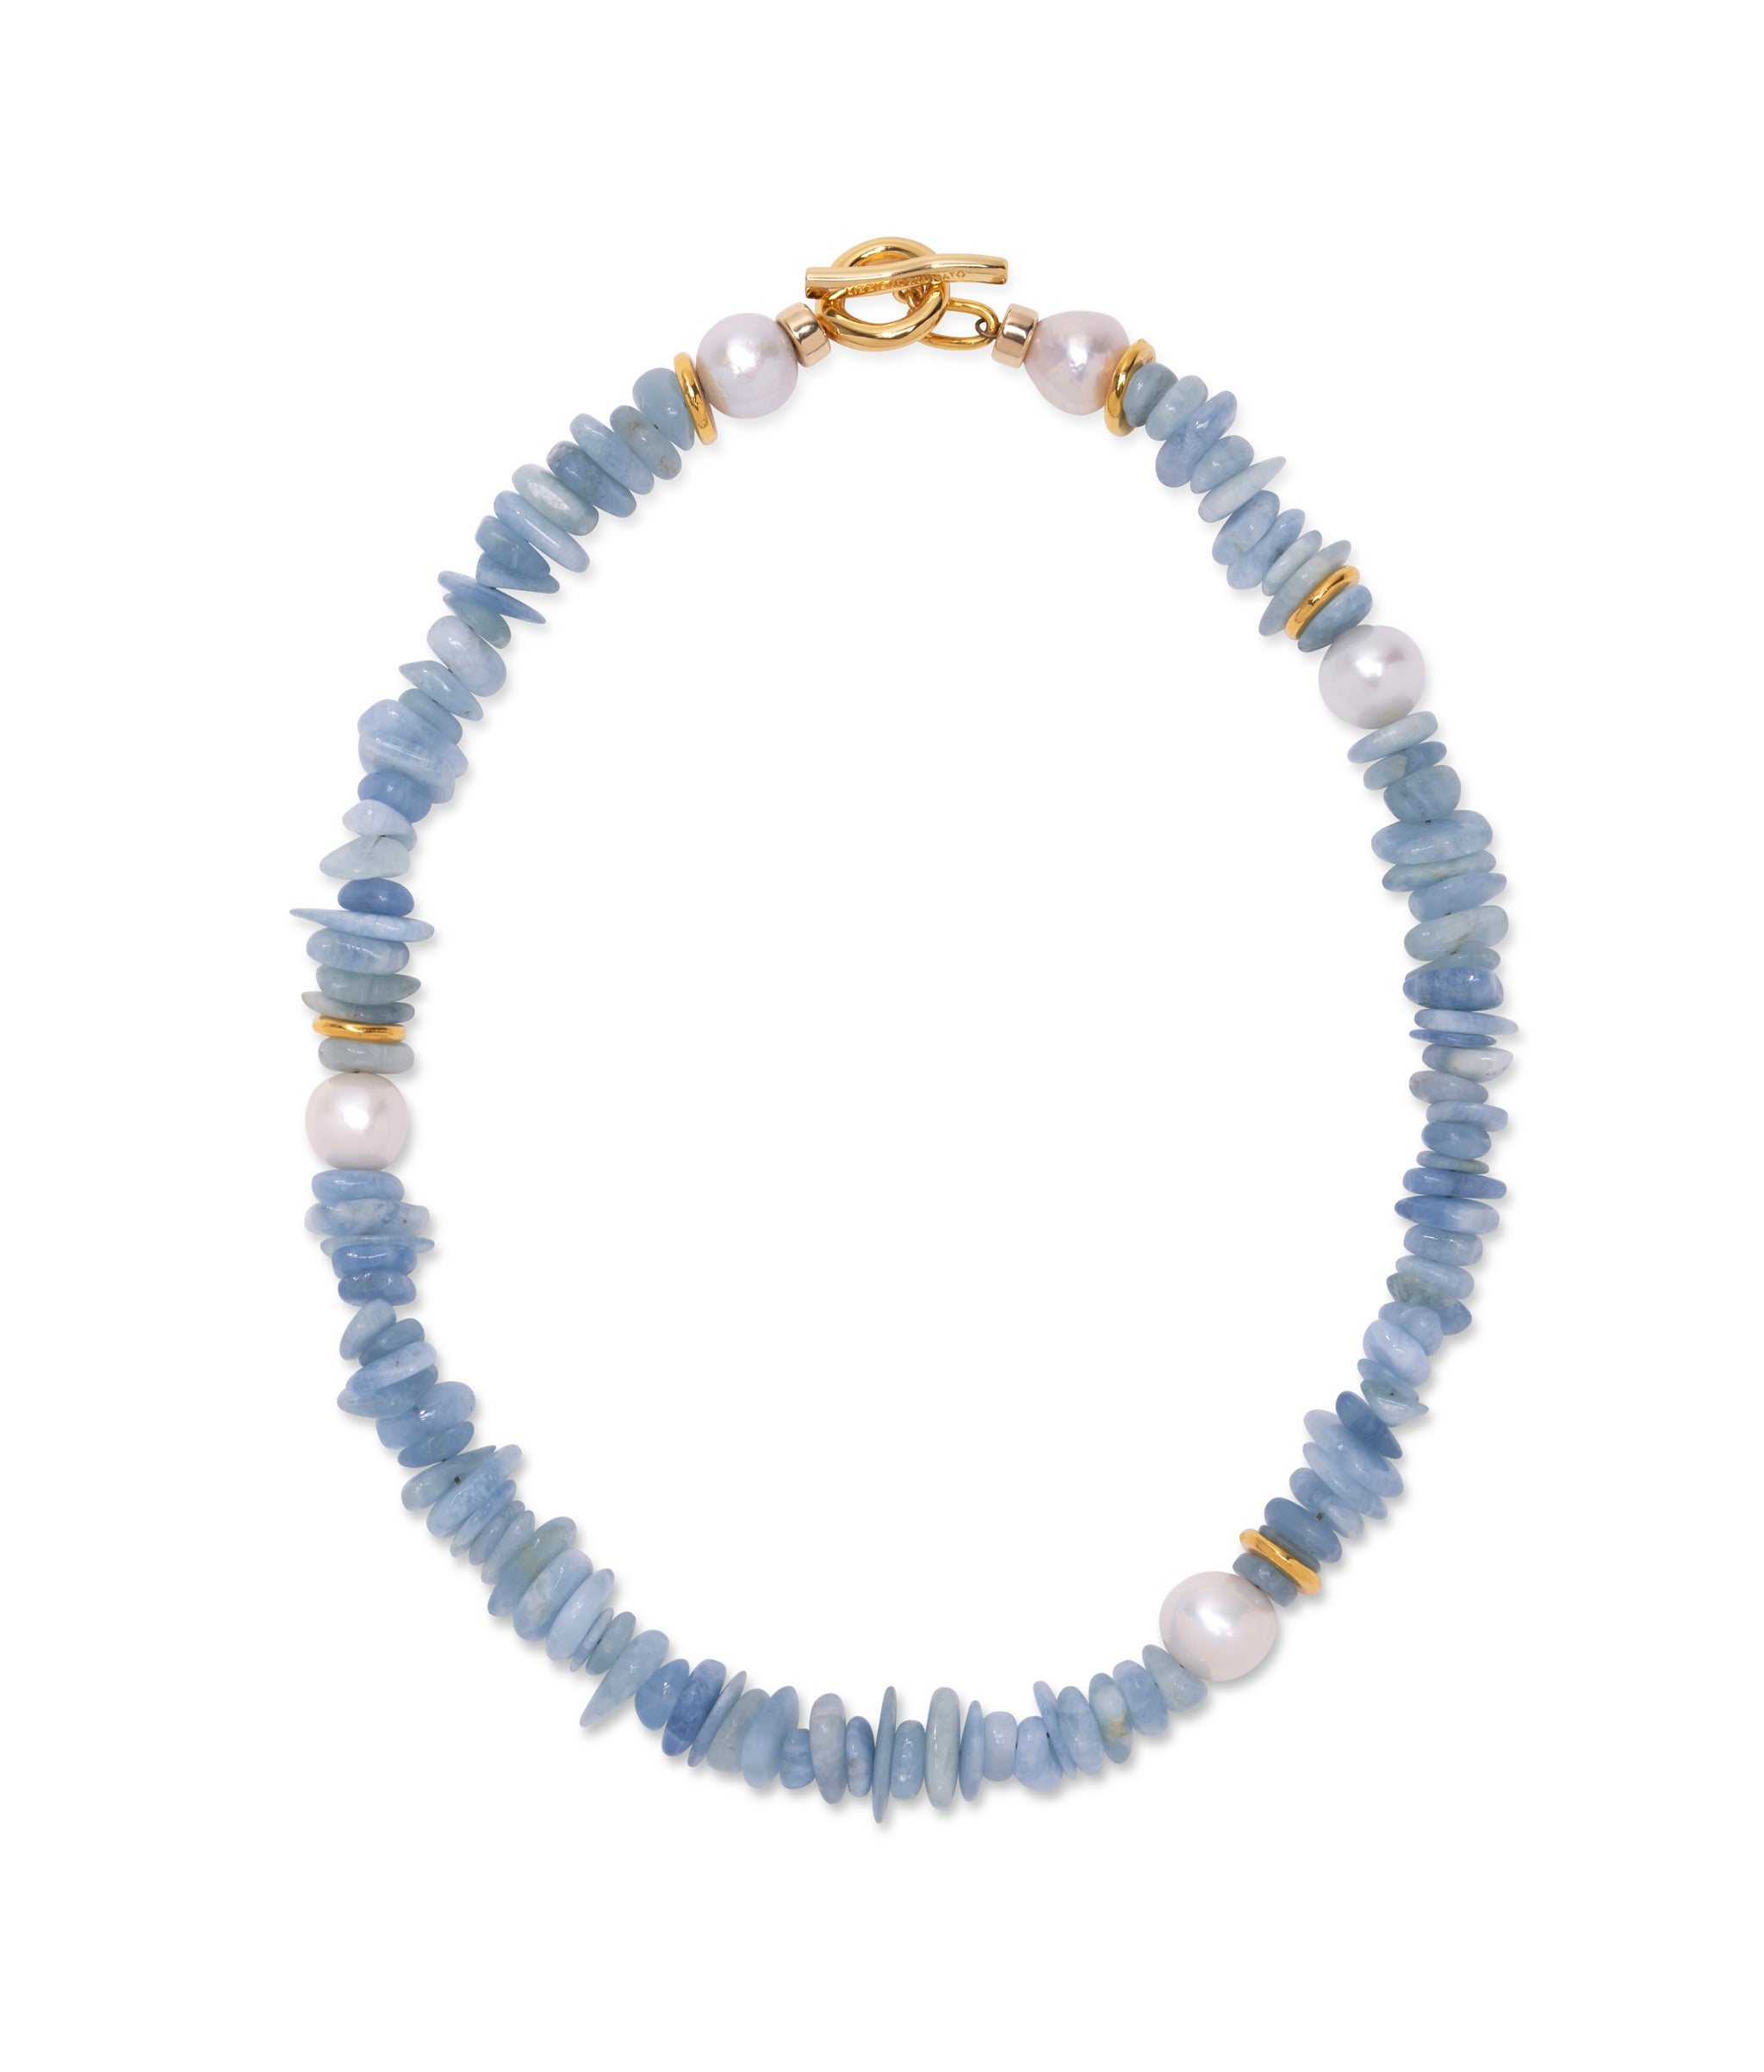 Mood Necklace in Aquamarine. Aquamarine necklace with freshwater pearls and gold plated brass with toggle closure.